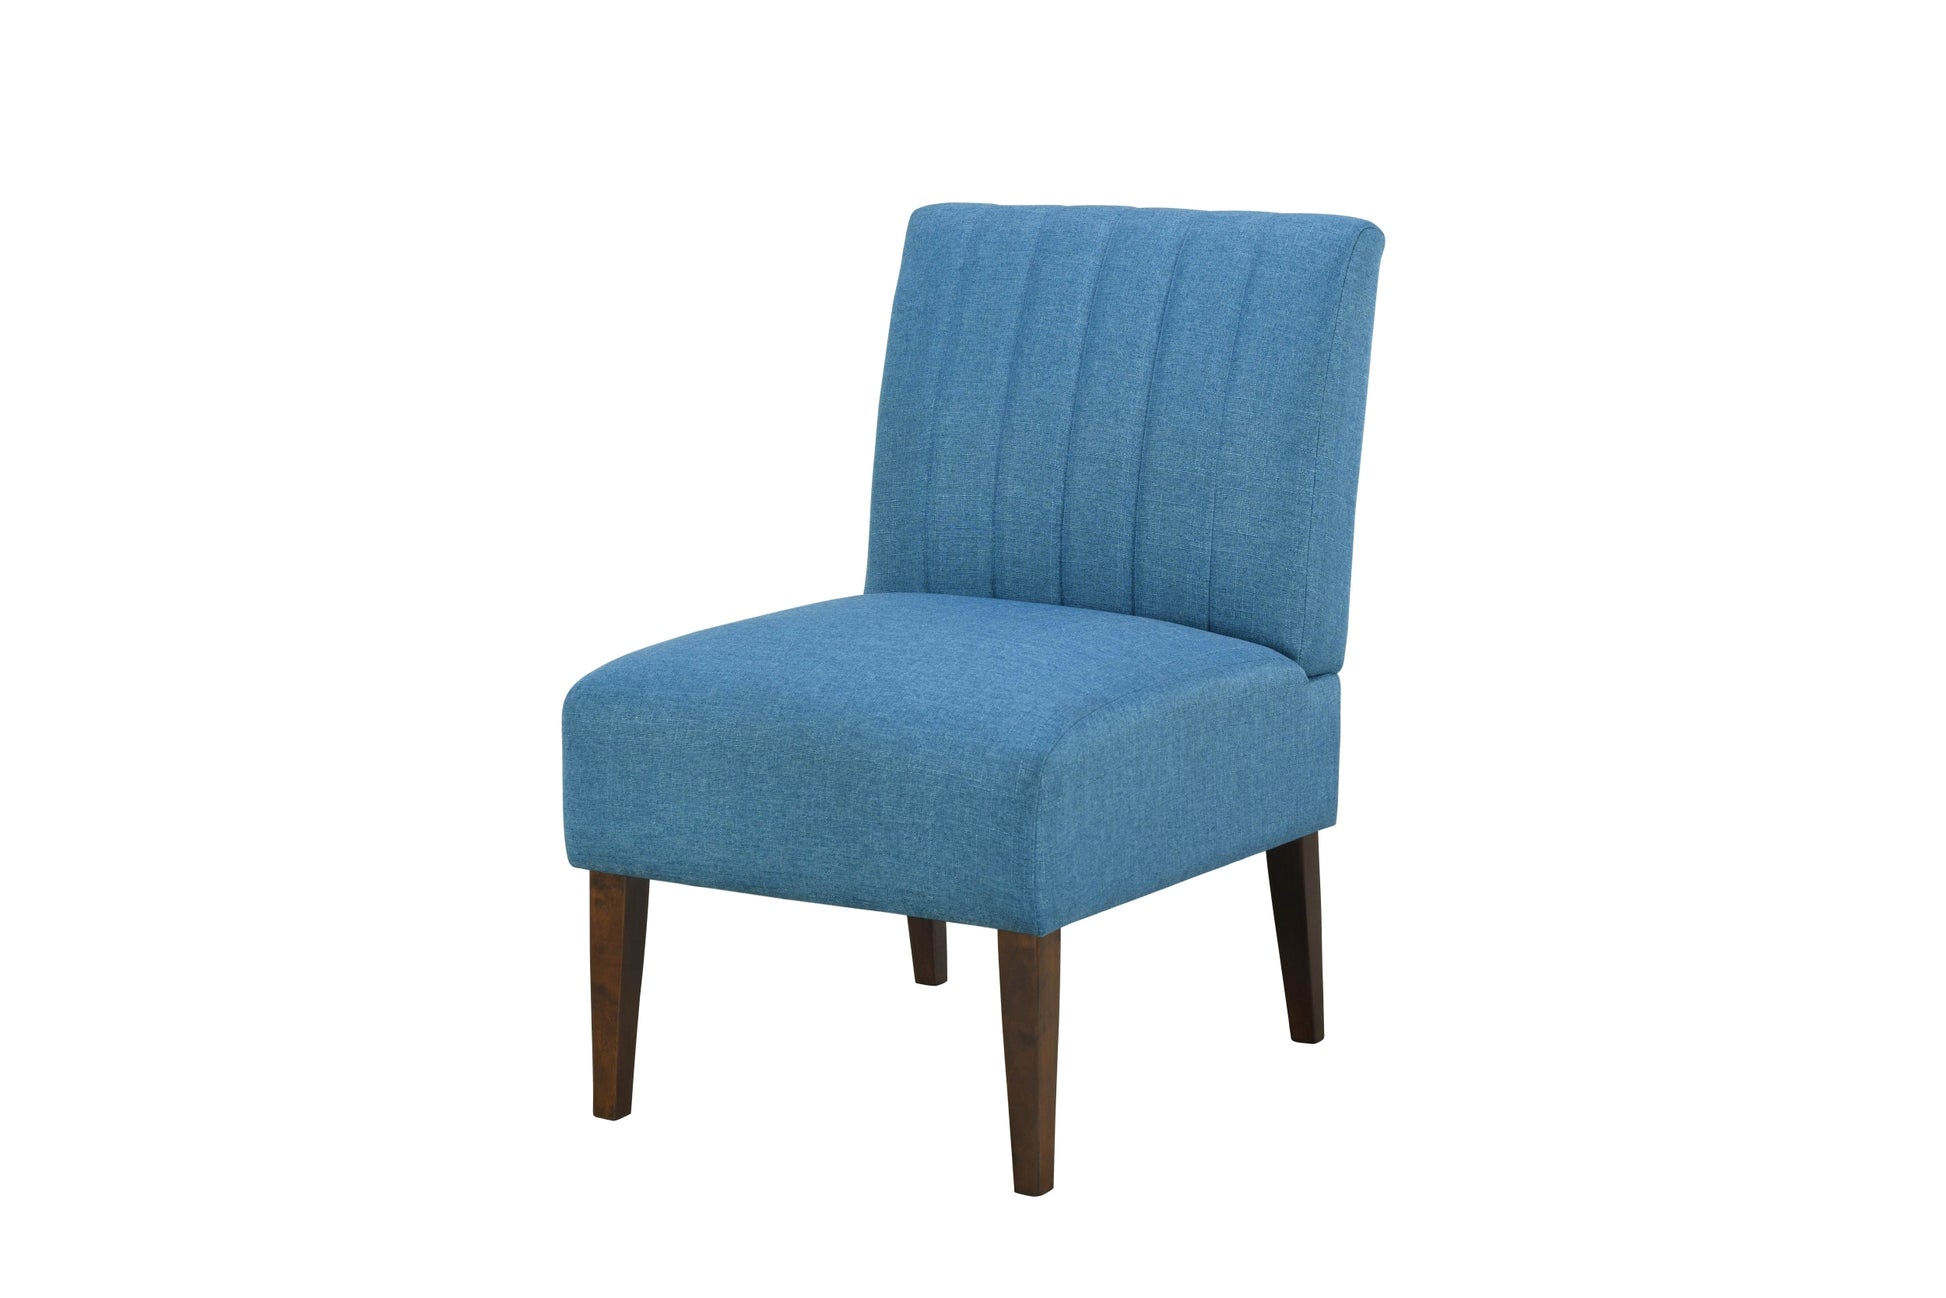 Stylish Comfortable Accent Chair 1pc Blue Fabric blue-primary living space-wood